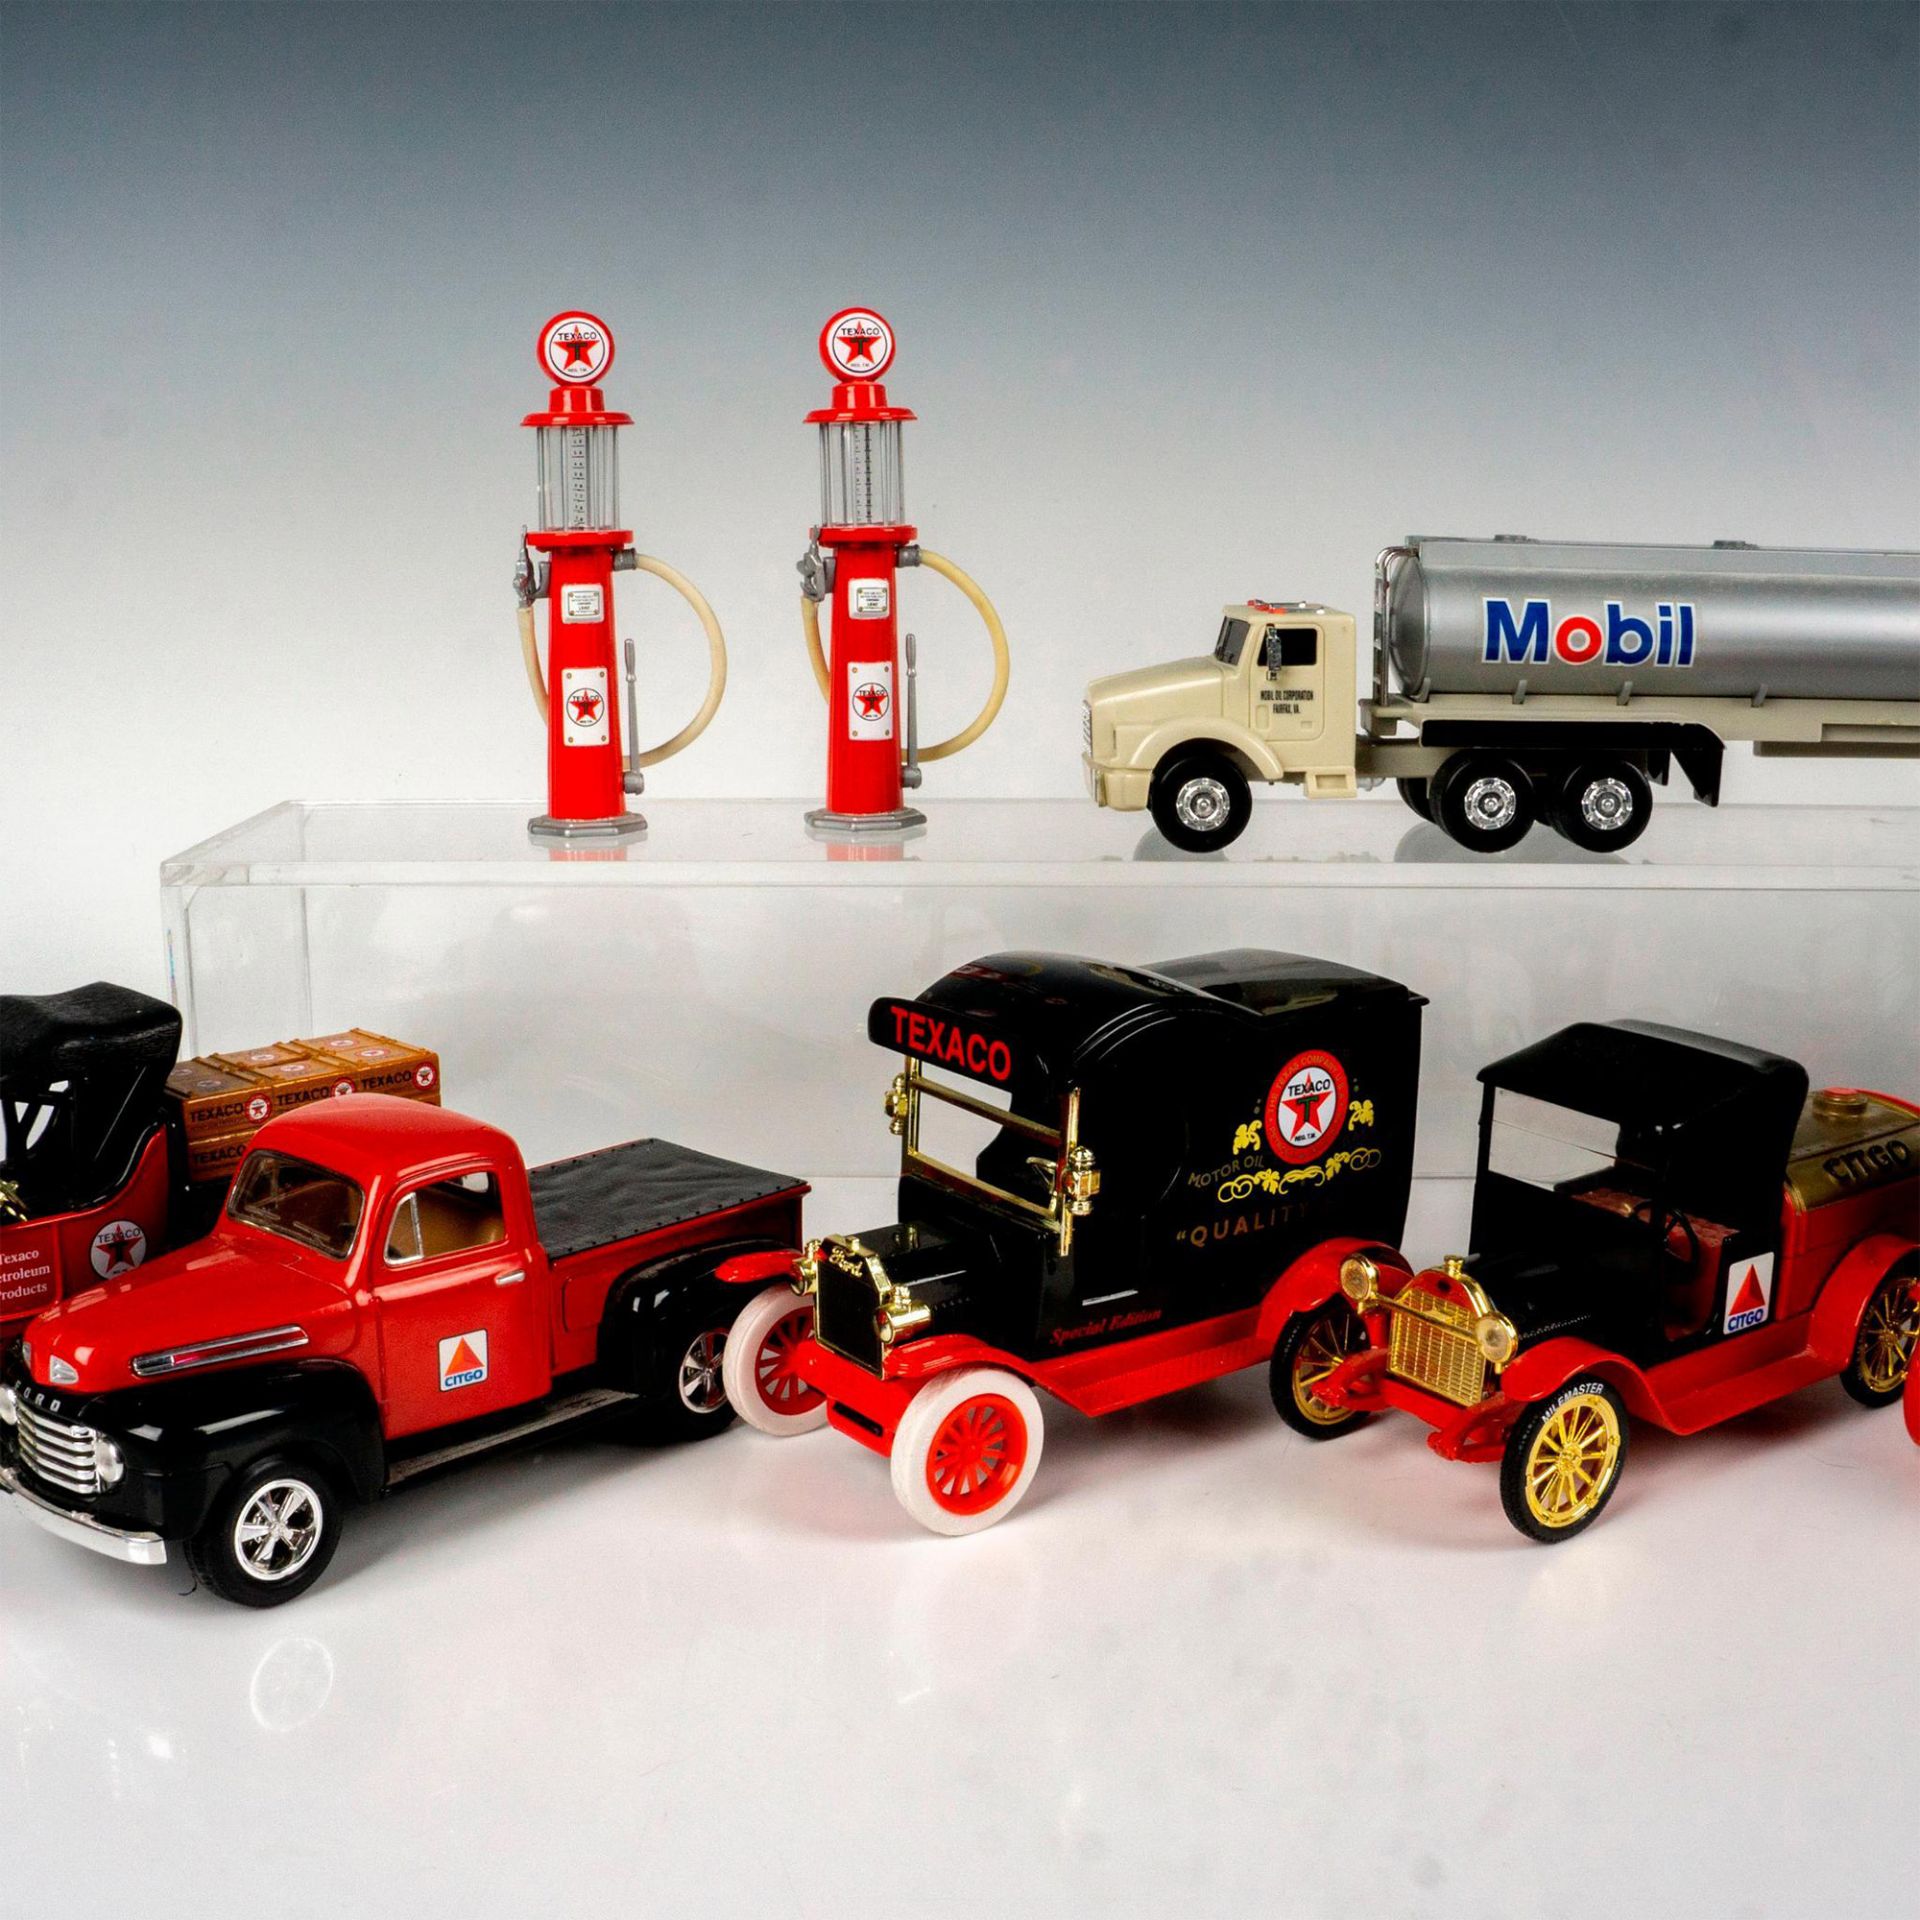 9pc Gasoline Company Truck Collection, Banks and Models - Image 3 of 5